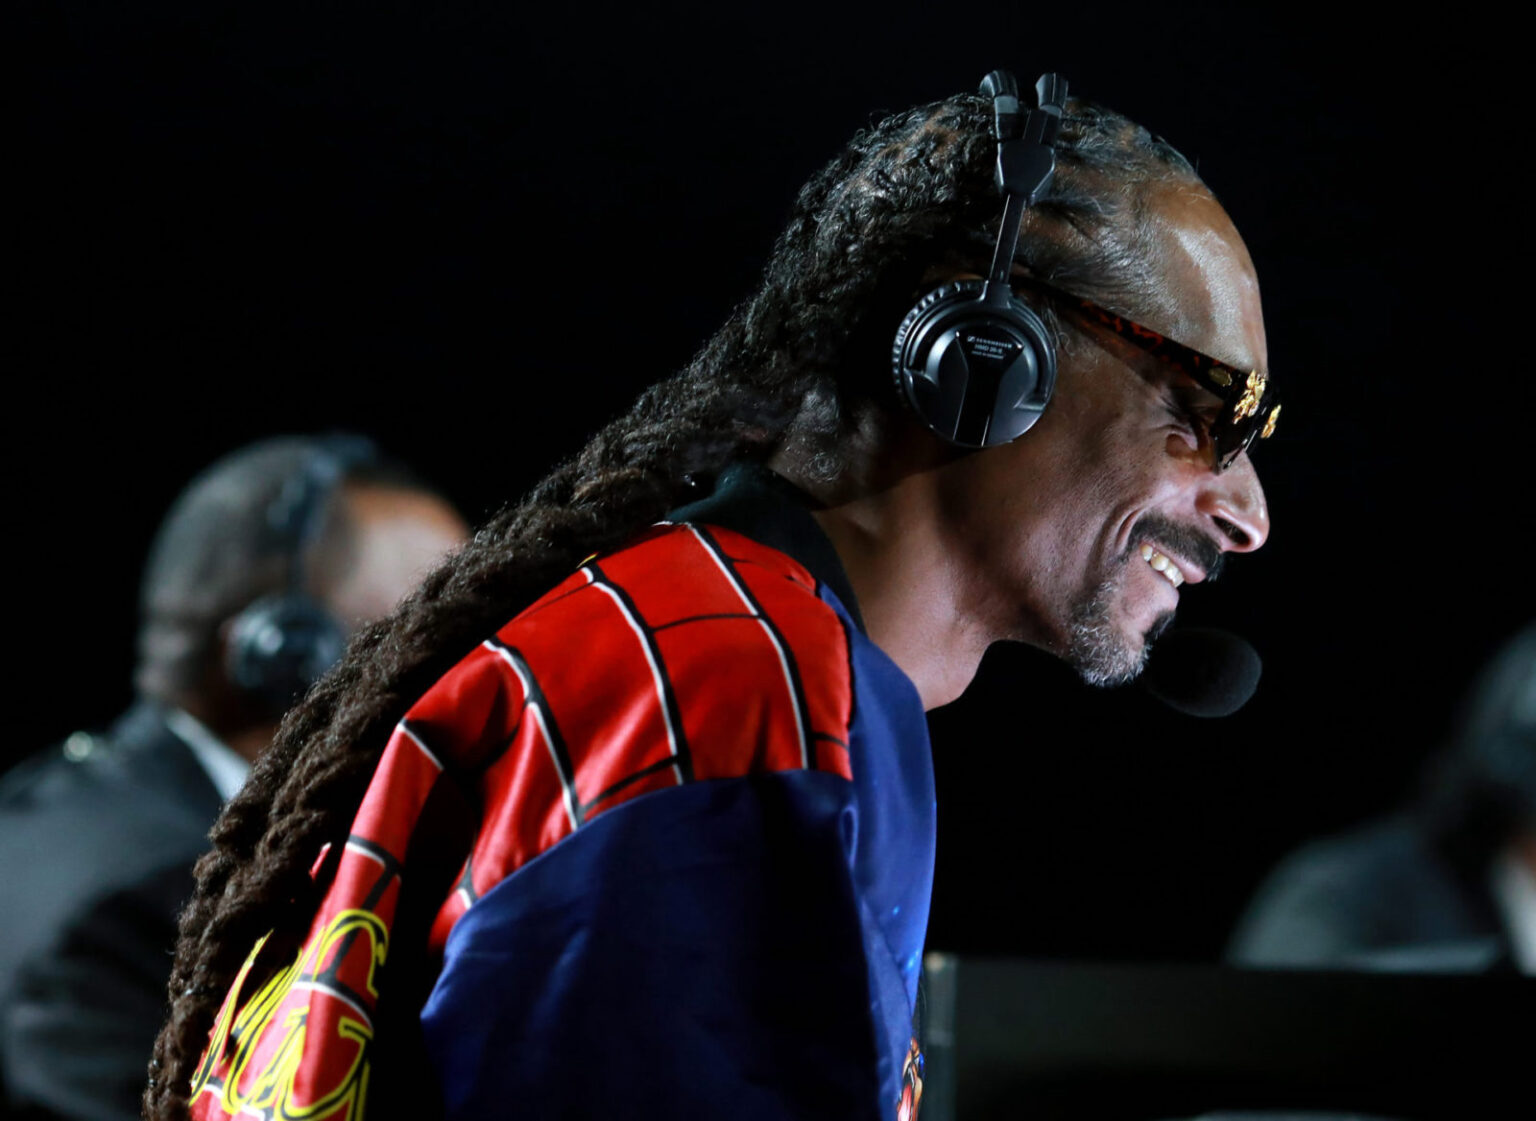 Snoop Dogg is already one of the highest-paid rappers in the industry. Did the Mike Tyson fight boost his net worth? Read about it here.